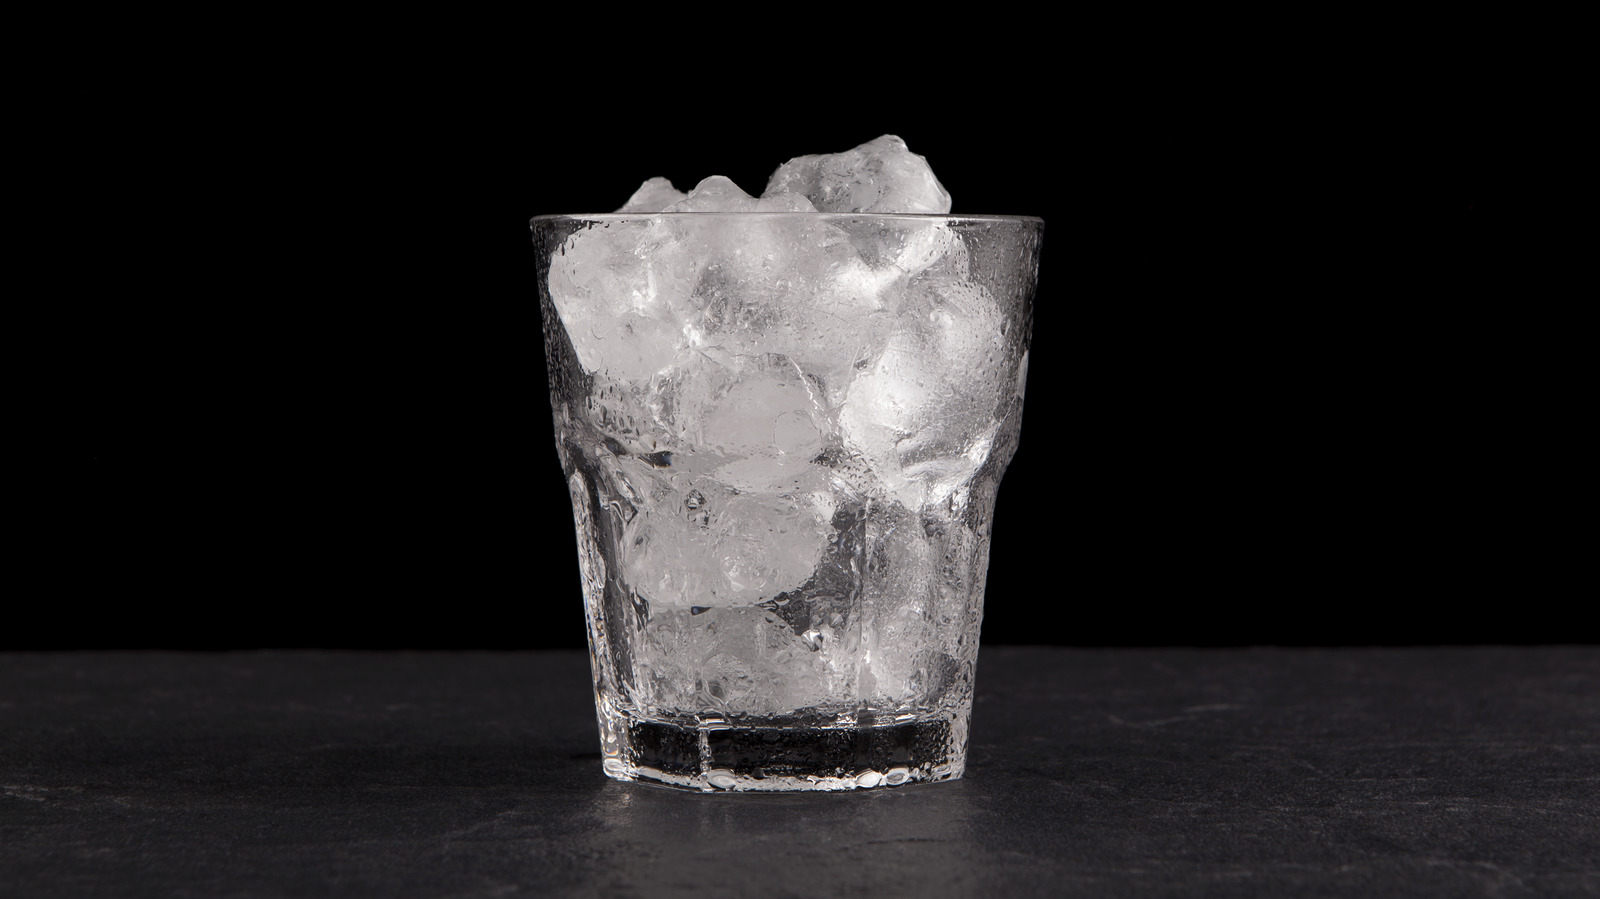 https://www.tastingtable.com/img/gallery/why-you-should-never-use-glass-to-scoop-ice/l-intro-1667906764.jpg